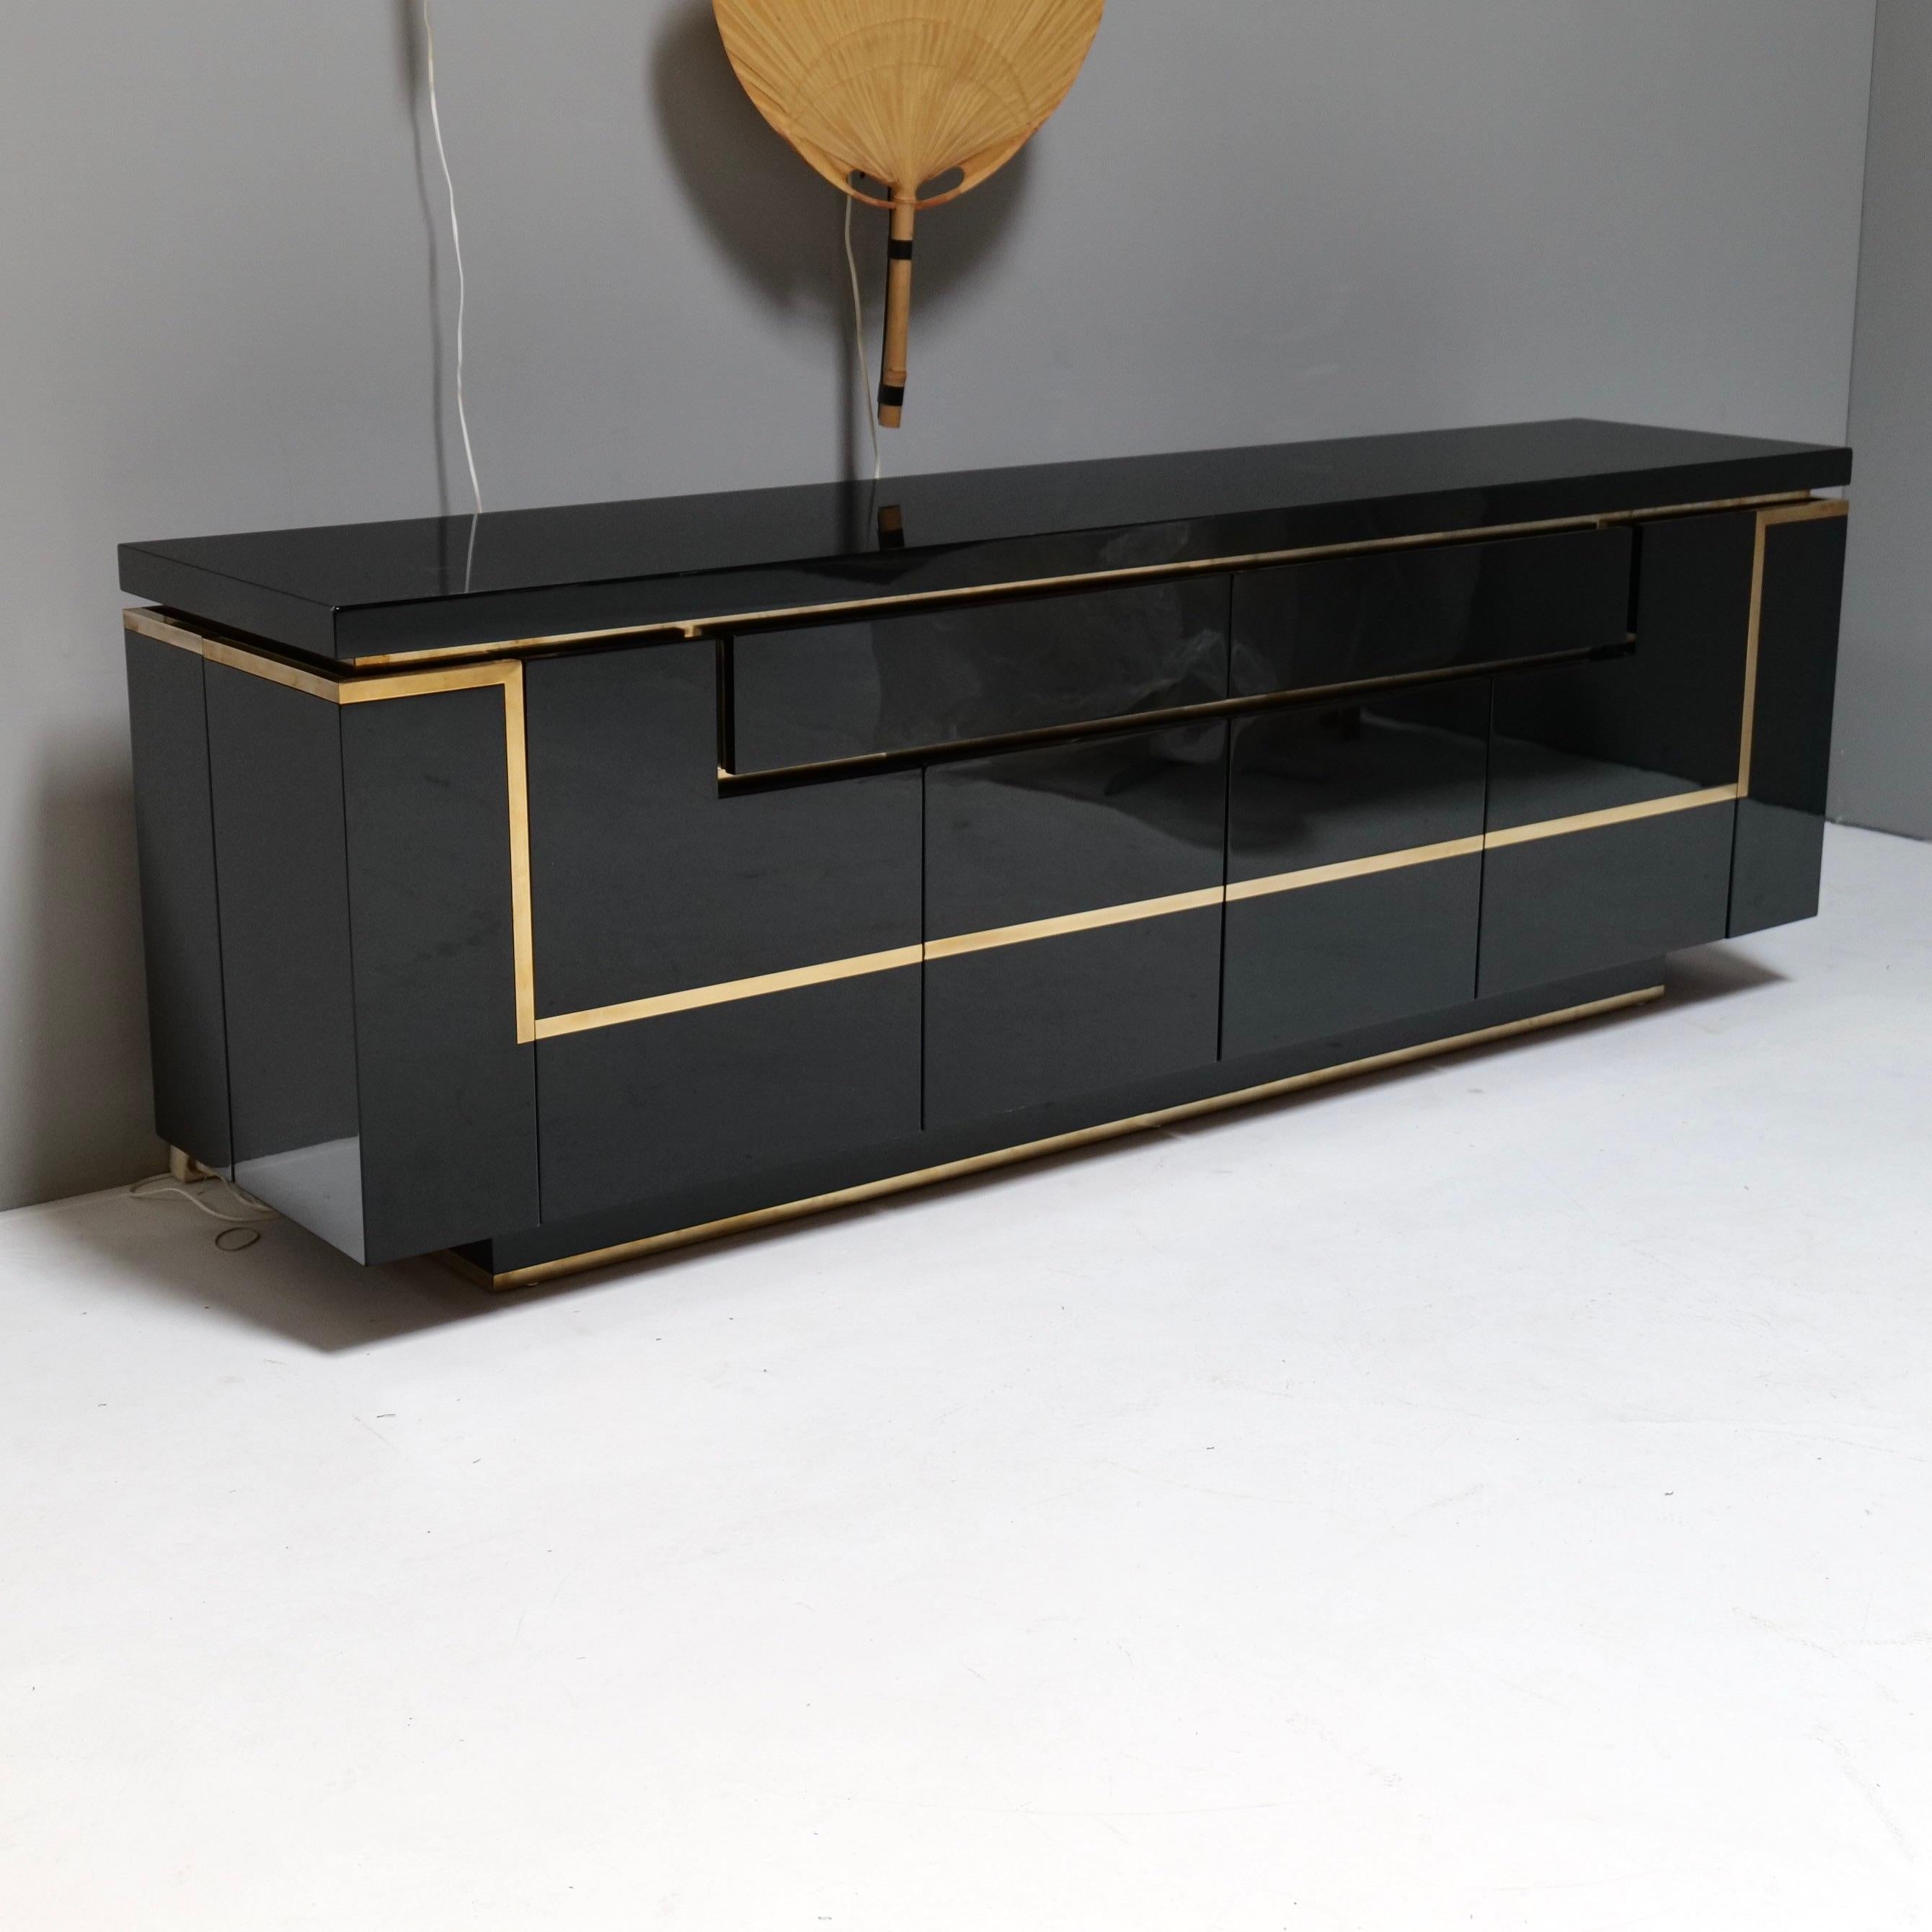 French Jean Claude Mahey Highgloss Black Lacquer Sideboard, 1970s For Sale